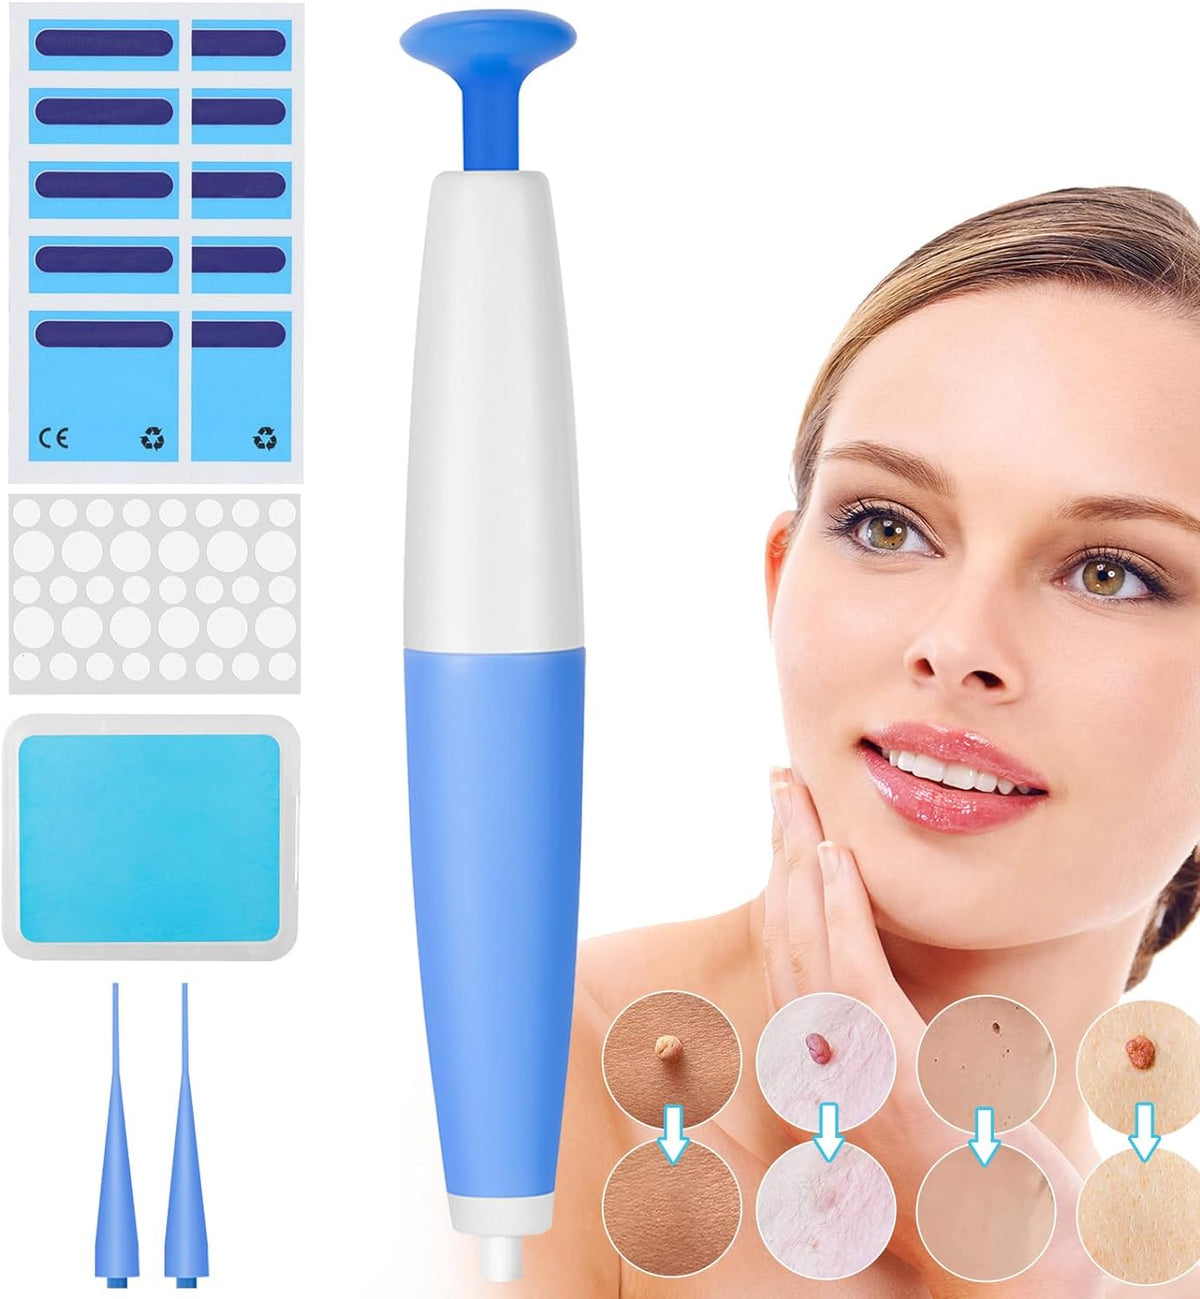 Skin Care Removal Kits, Skin Care Removal Kit, Fast and Easy Operate Skin Home Removal Tool Cykapu